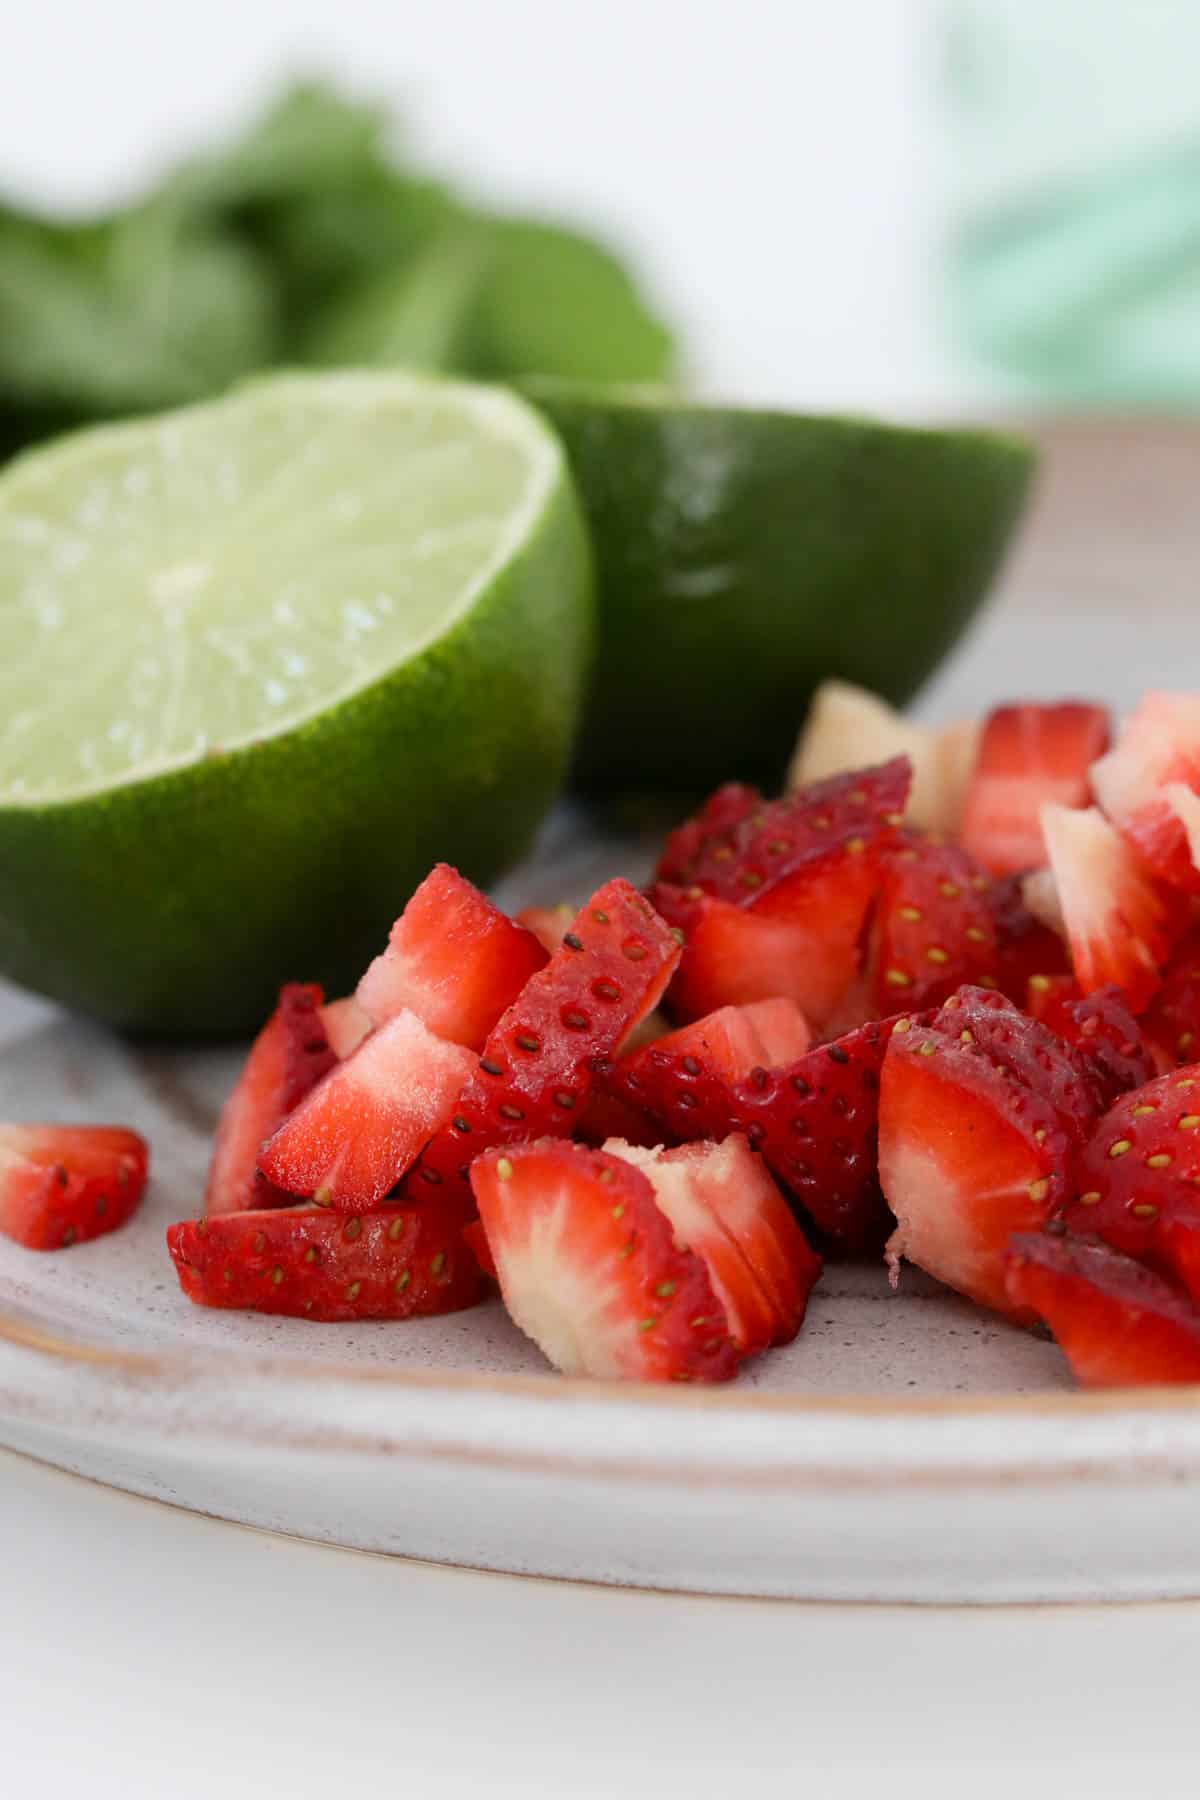 Finely diced strawberries and halved limes on a plate.